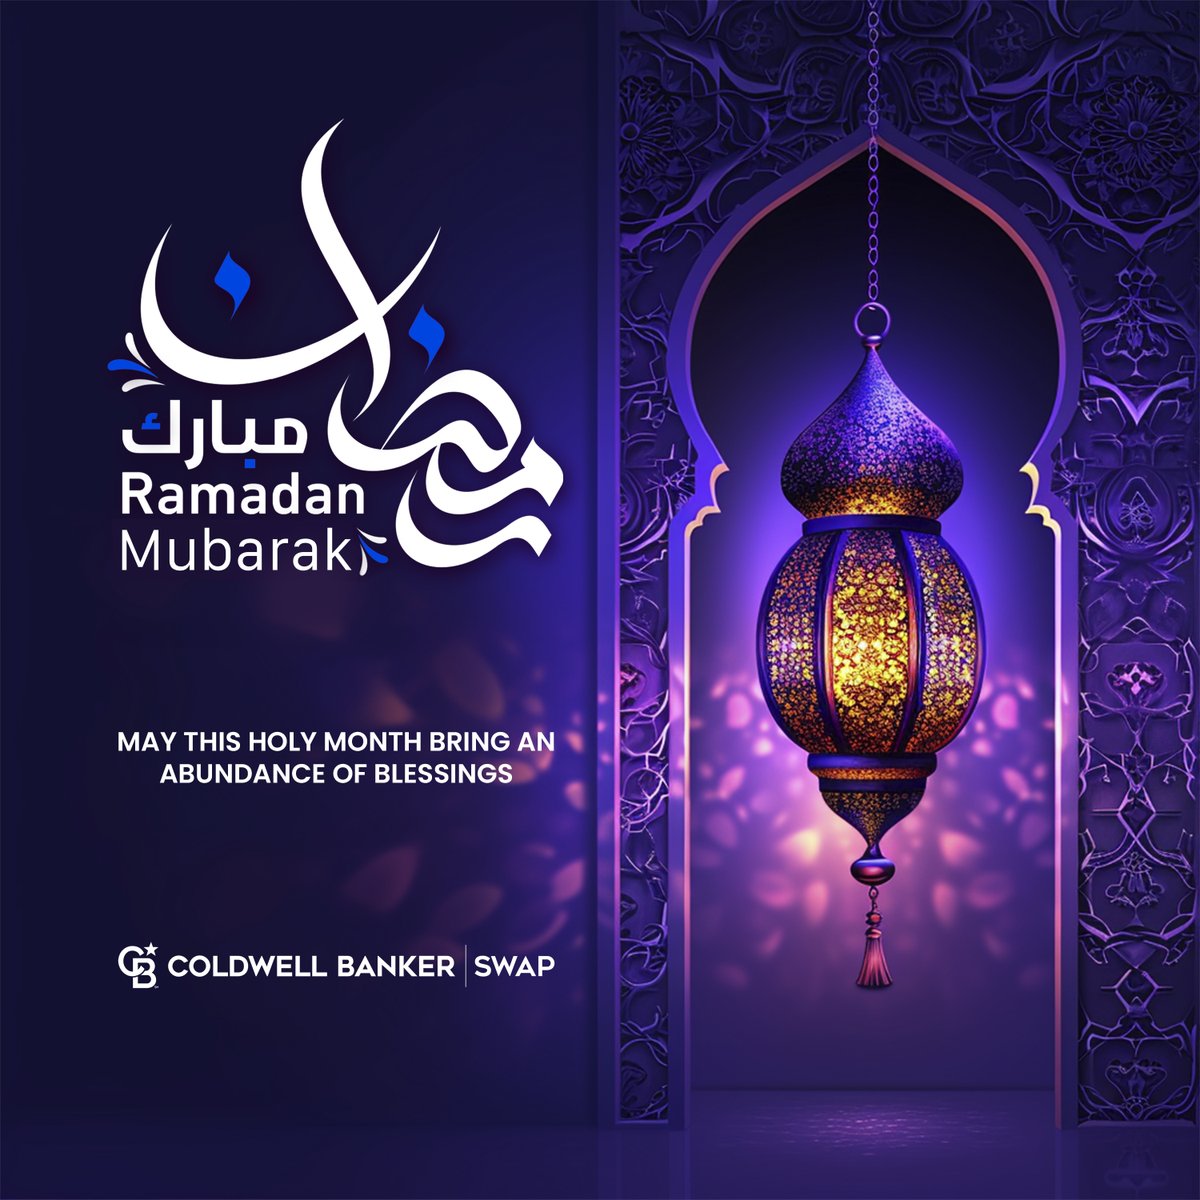 Wishing you and your loved ones a blessed Ramadan filled with joy, peace, and harmony. Ramadan Mubarak from the Coldwell Banker Swap family! 🌙✨ #RamadanMubarak #ColdwellBankerSwap #Blessings